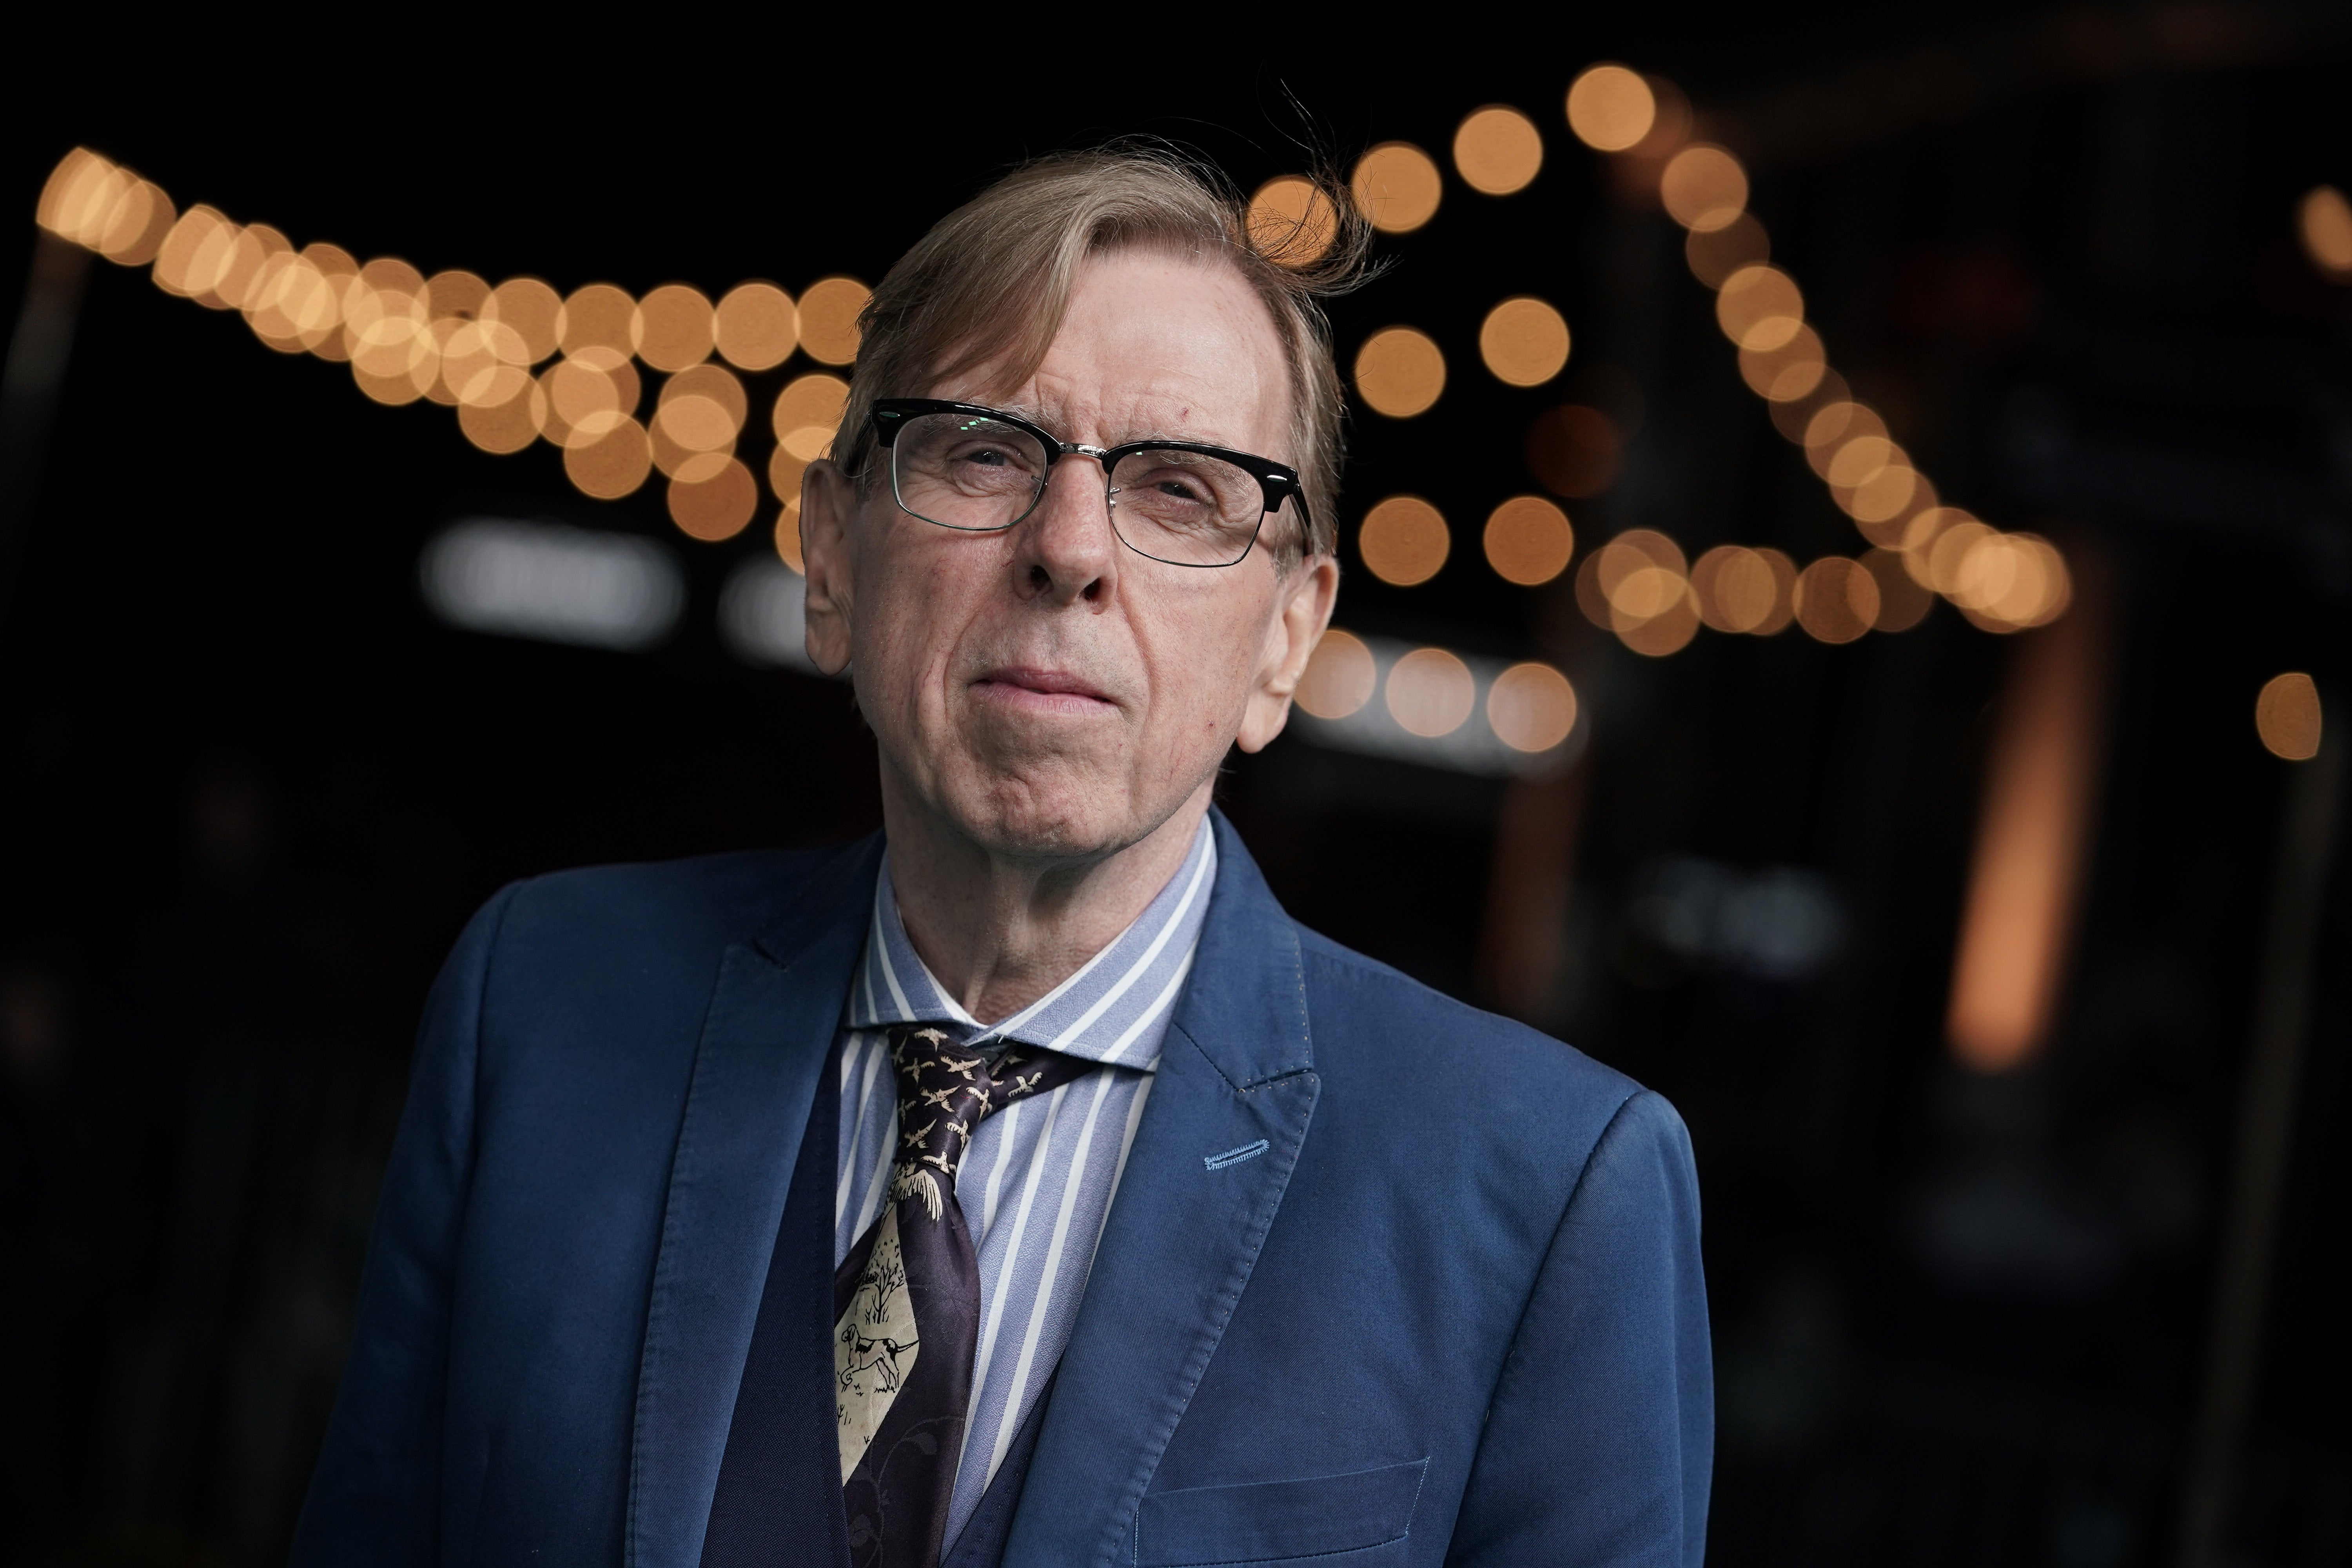 Timothy Spall says his Christmas show is ‘original and daring in the way that it combines aspects of social commentary with entertainment’